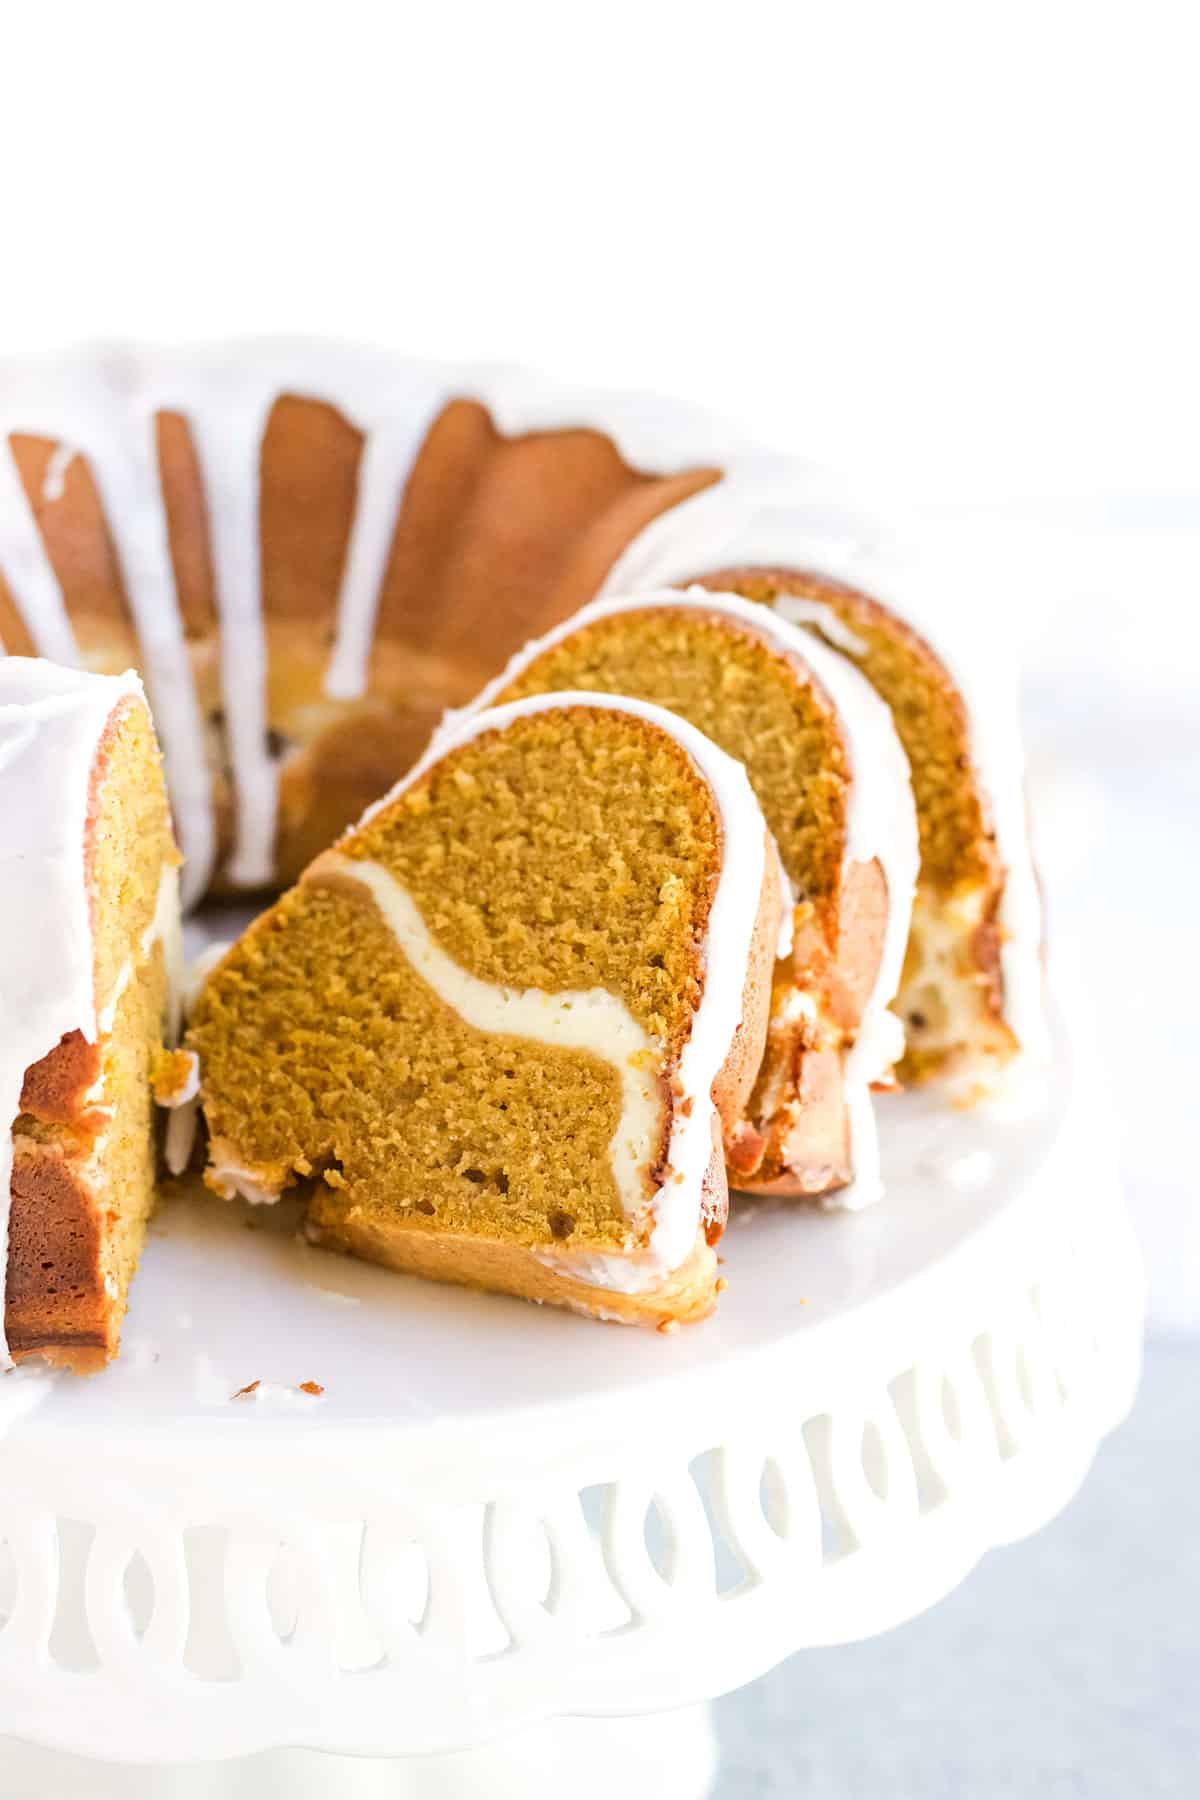 A pumpkin cream cheese pound cake sliced open on a white cake stand.